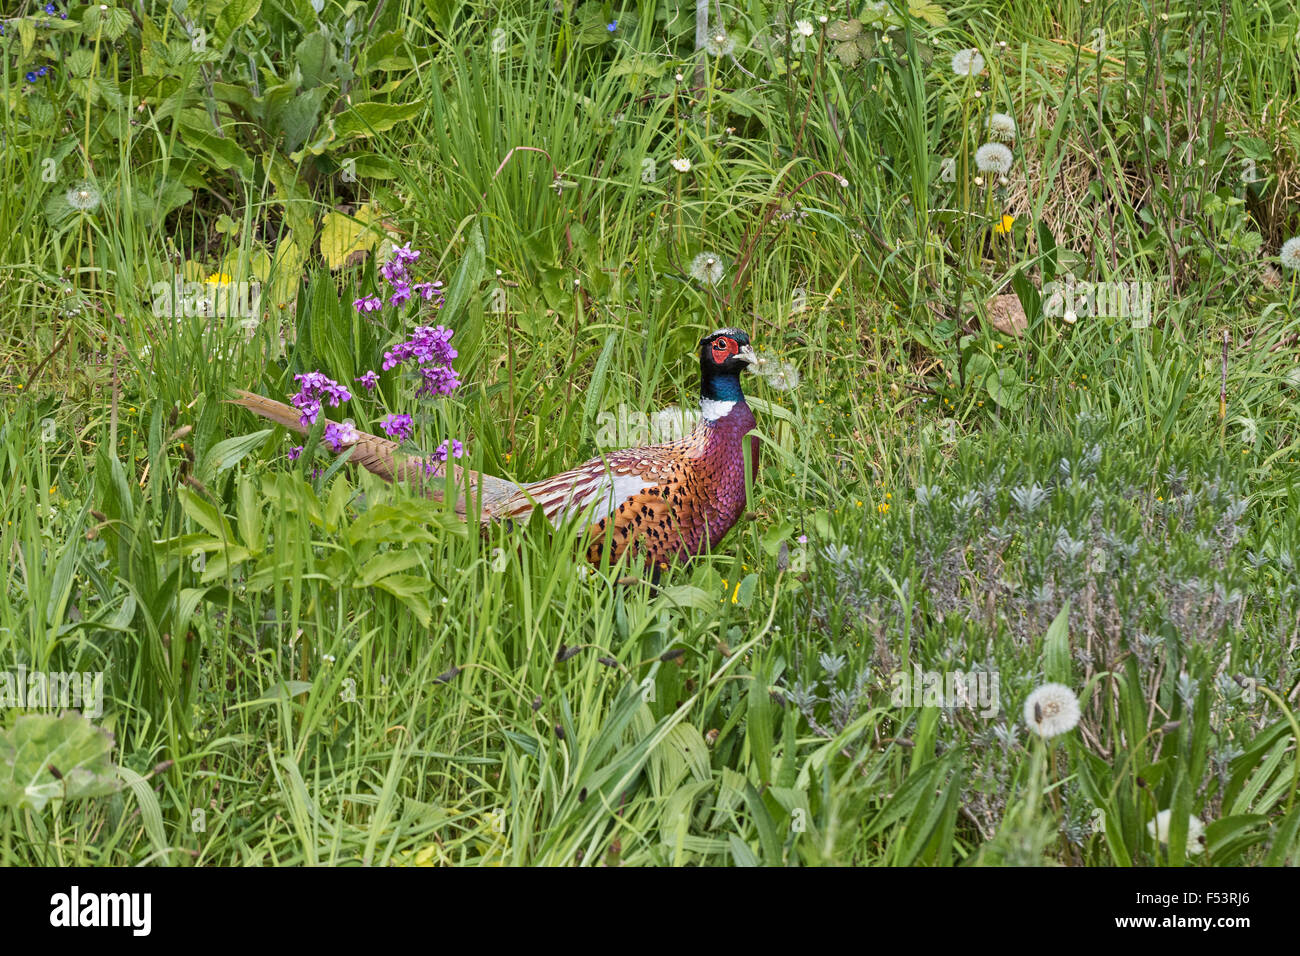 An urbanised Ring-necked Pheasant wandering in a neglected London garden Stock Photo